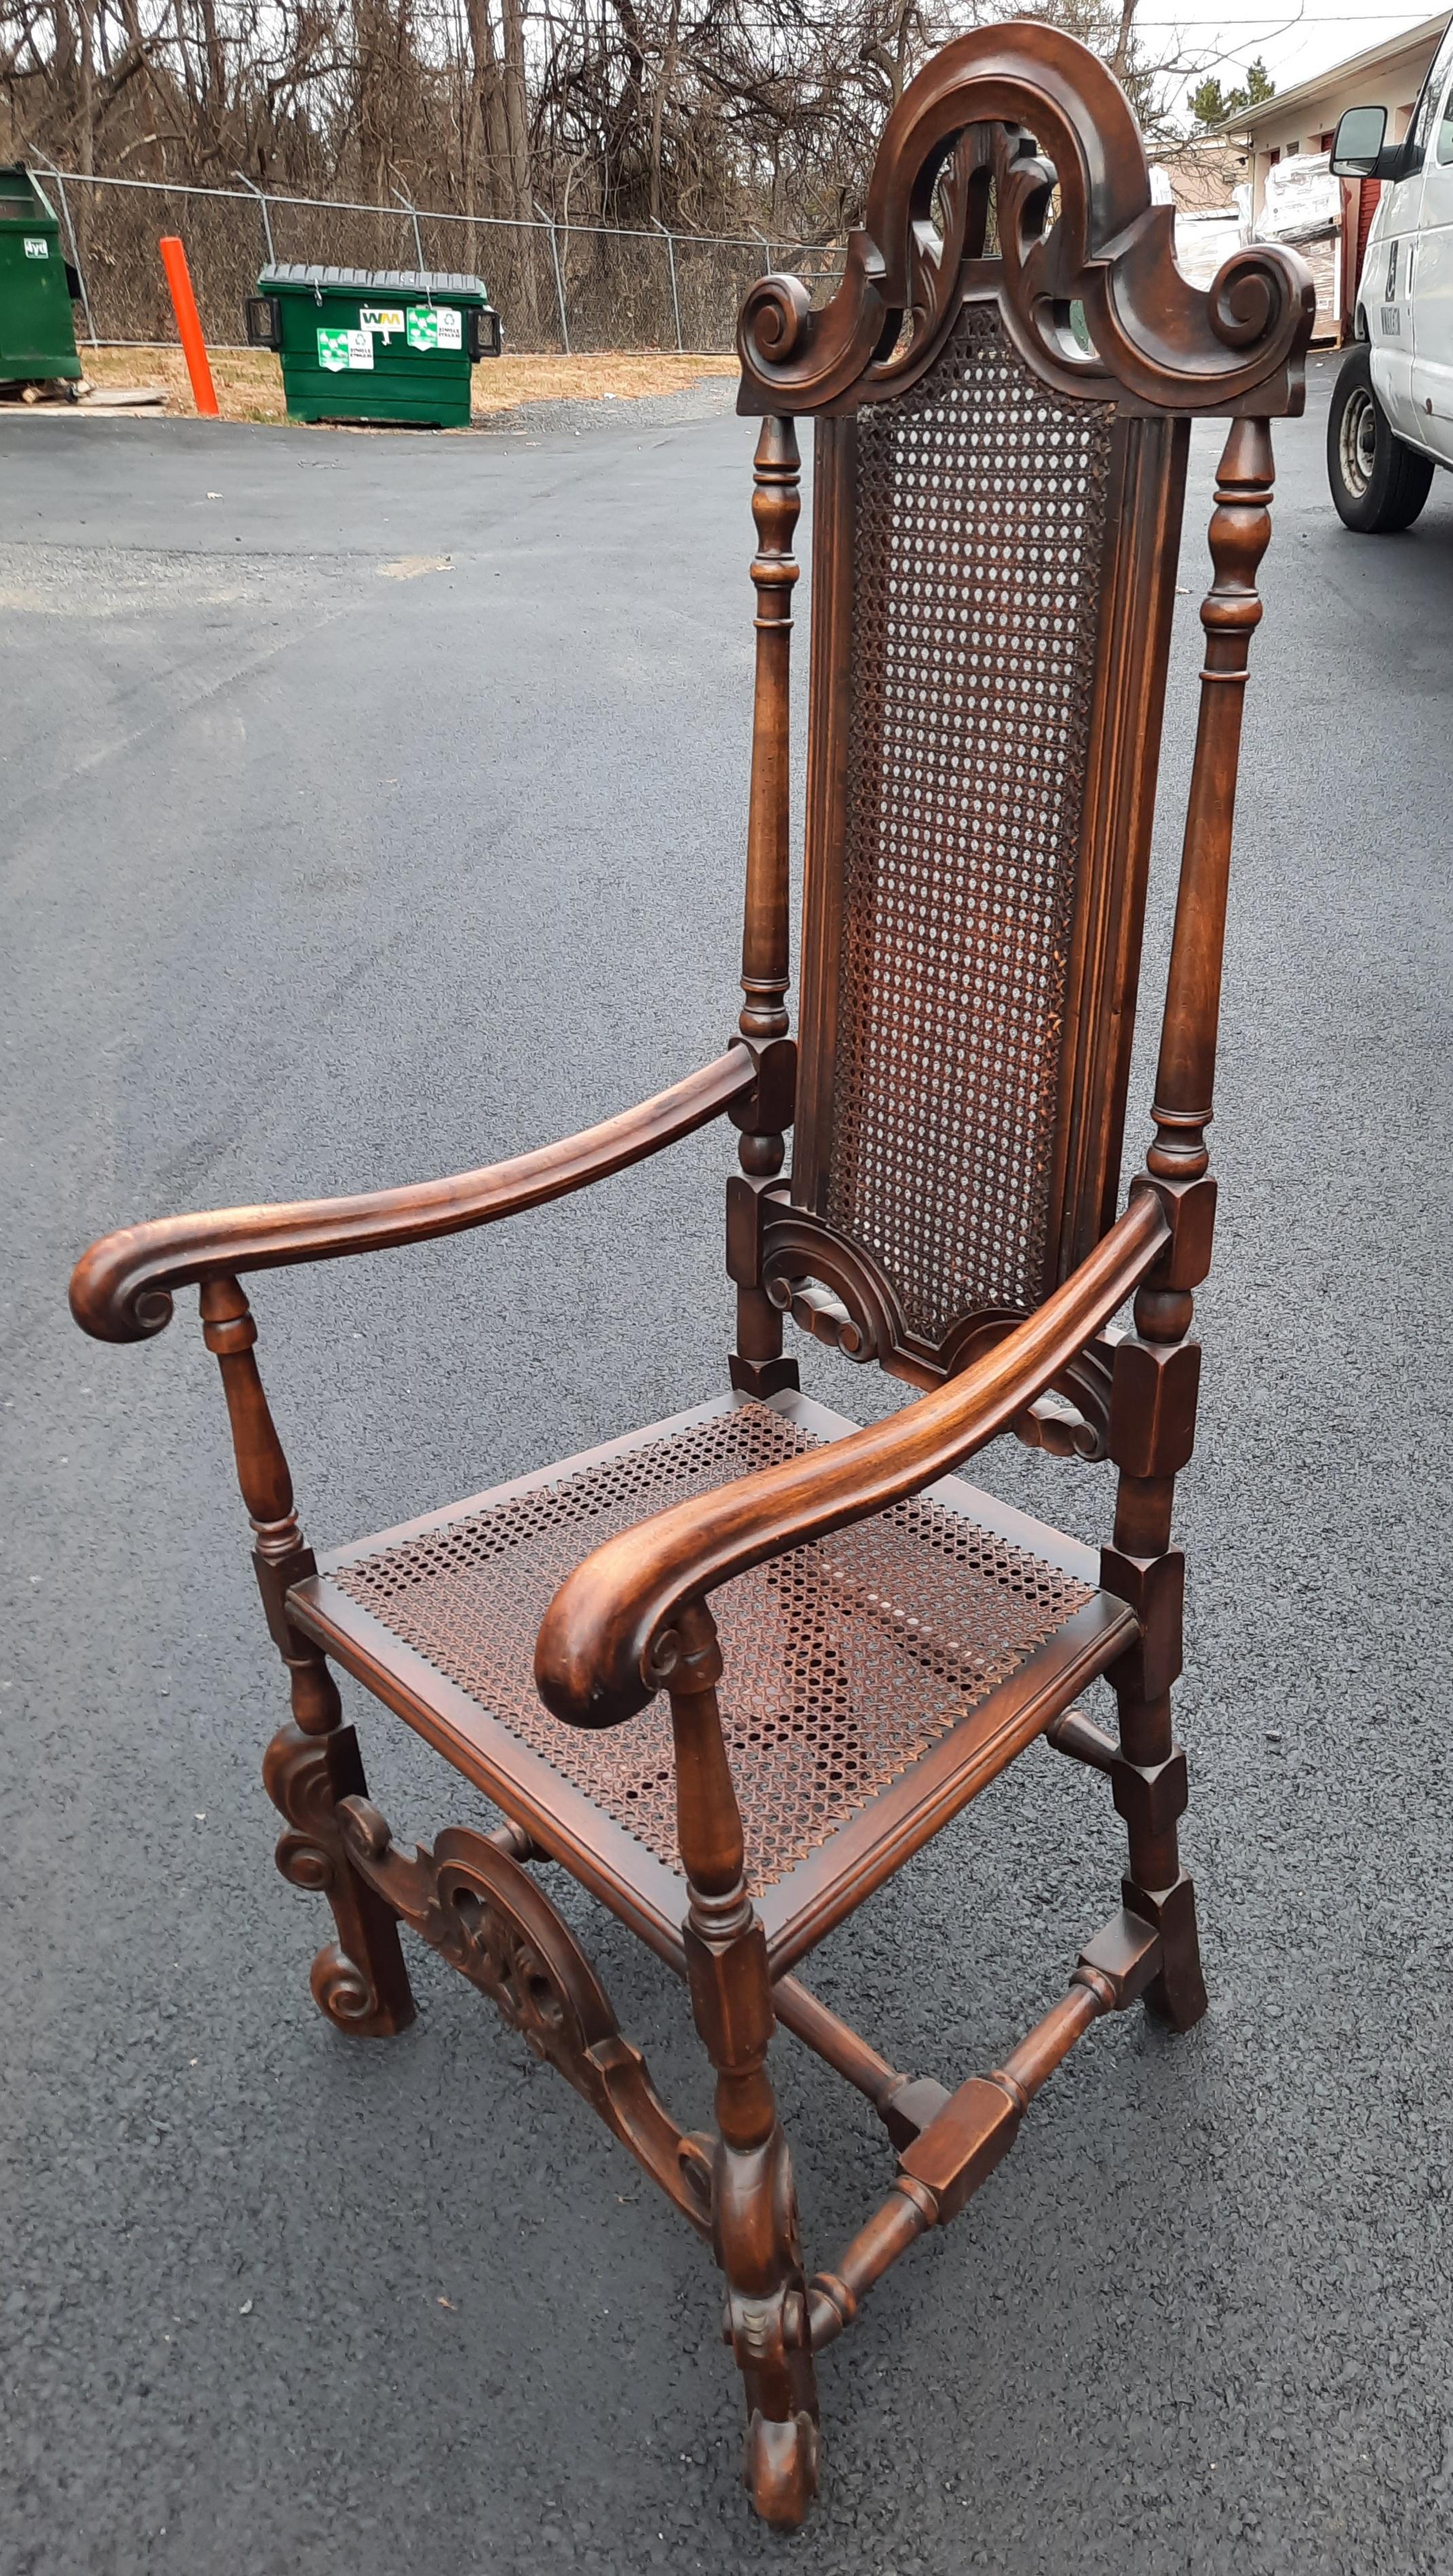 A very decorative antique Edwardian armchair in oak with custom loose cushion. The side supports are turned and topped with a crown. The chair has caned seat and partial back with turned side rails. The chair is very solid and the caning is in very